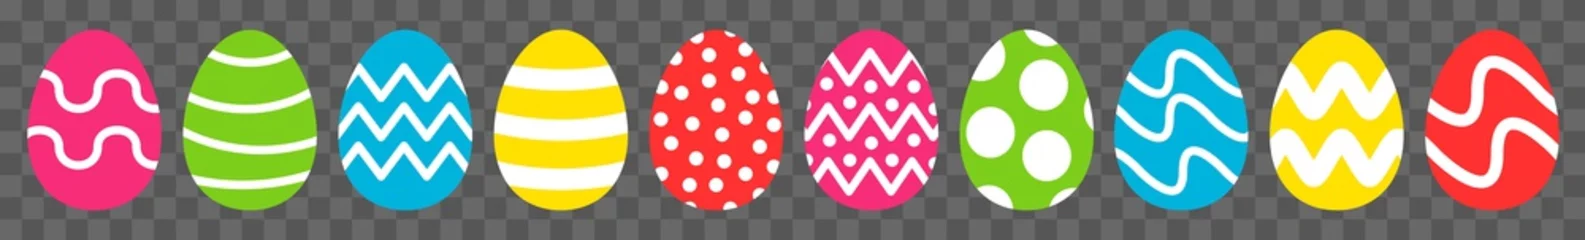  Easter Egg Icon Color   Painted Eggs Illustration   Happy Easter Hunt Symbol   Holiday Logo   April Spring Sign   Isolated   Variations © endstern